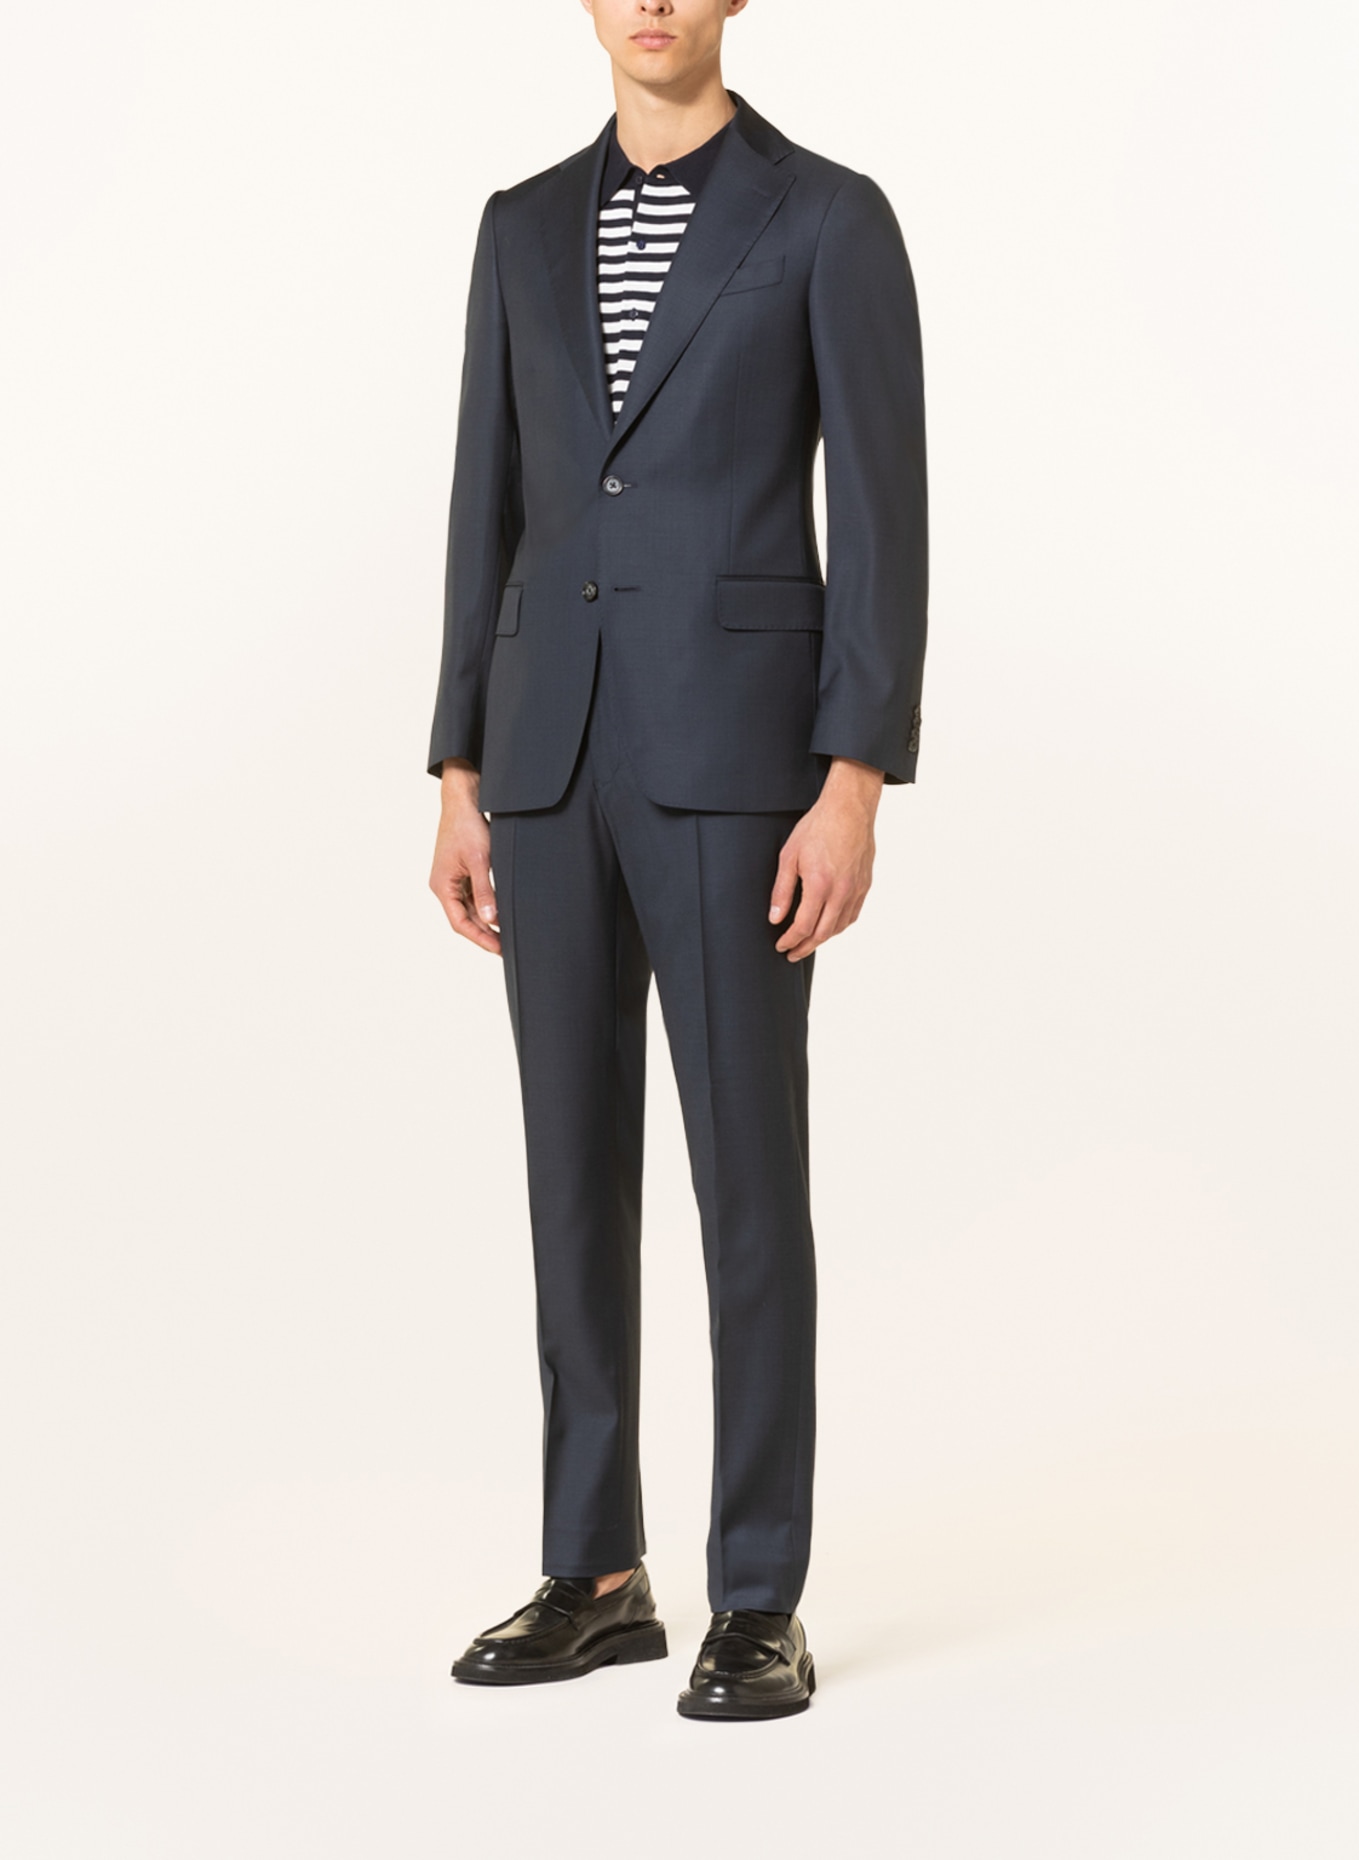 CHAS Suit jacket extra slim fit, Color: 1/176 Navy (Image 2)